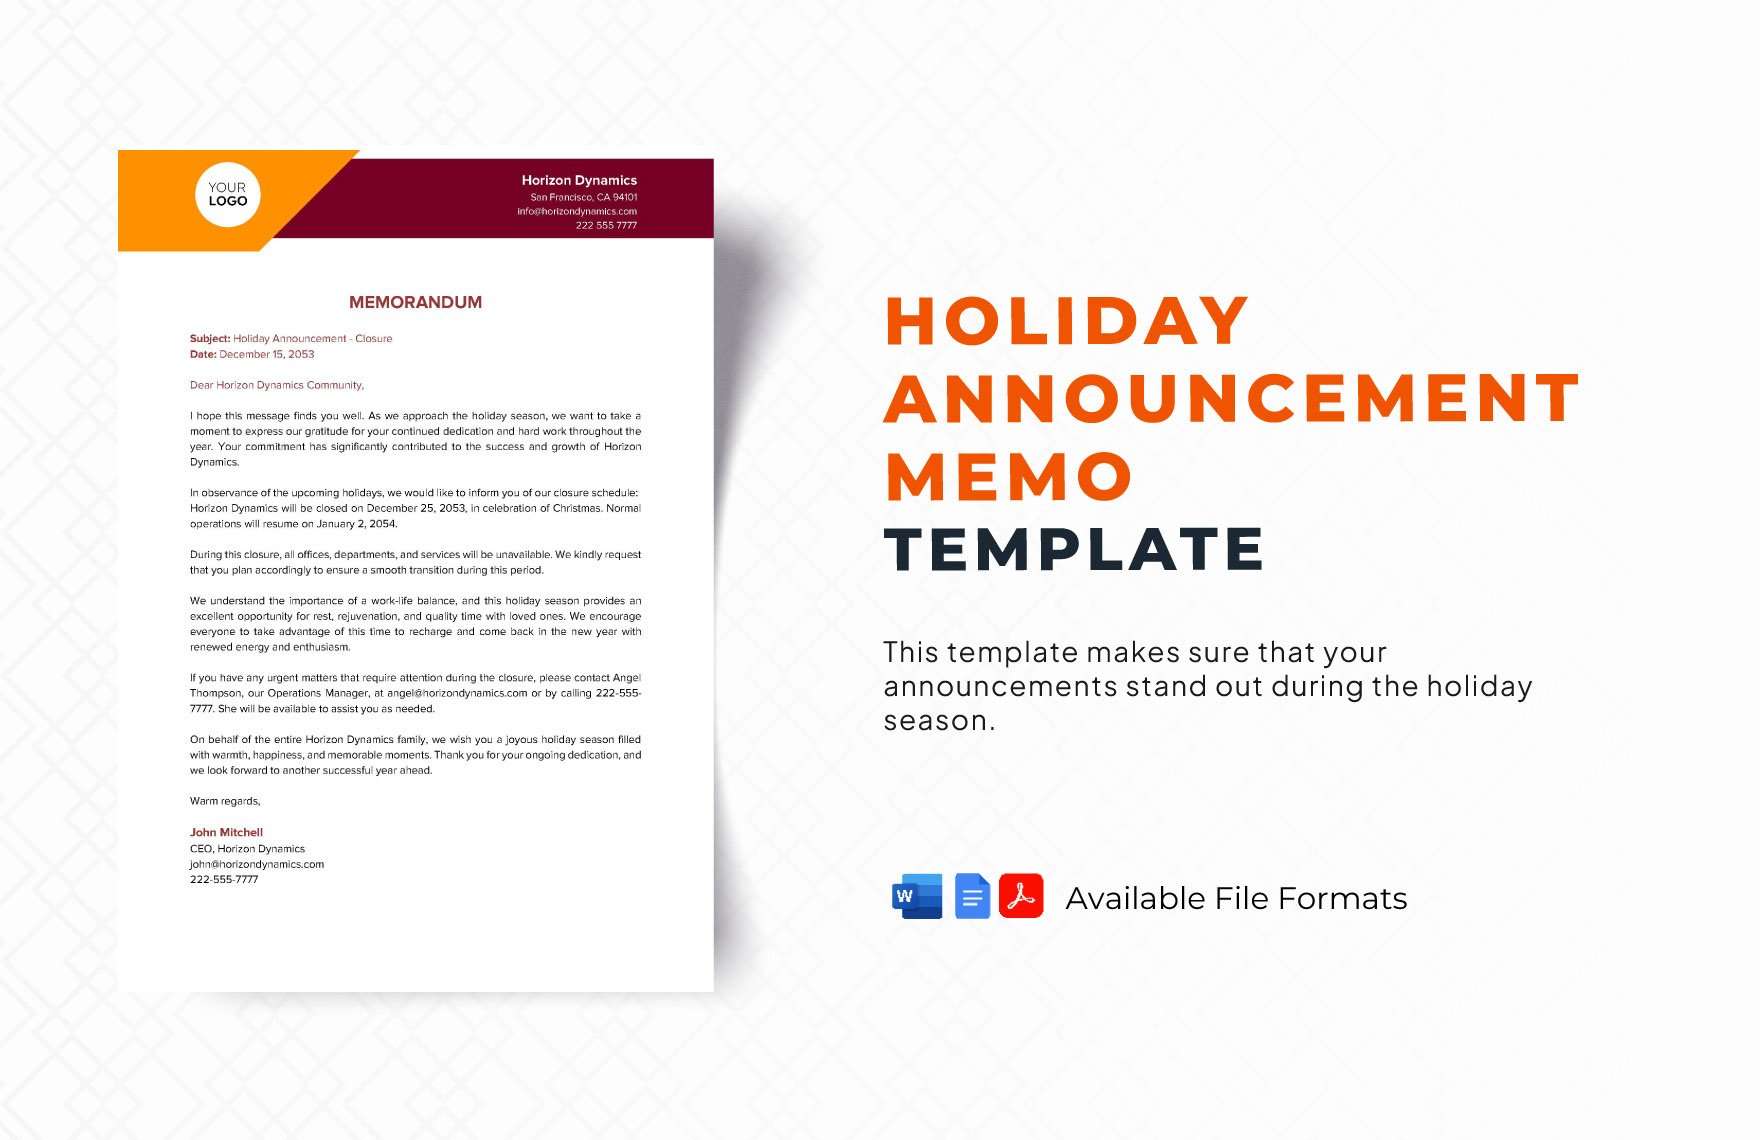 Holiday Announcement Memo Template